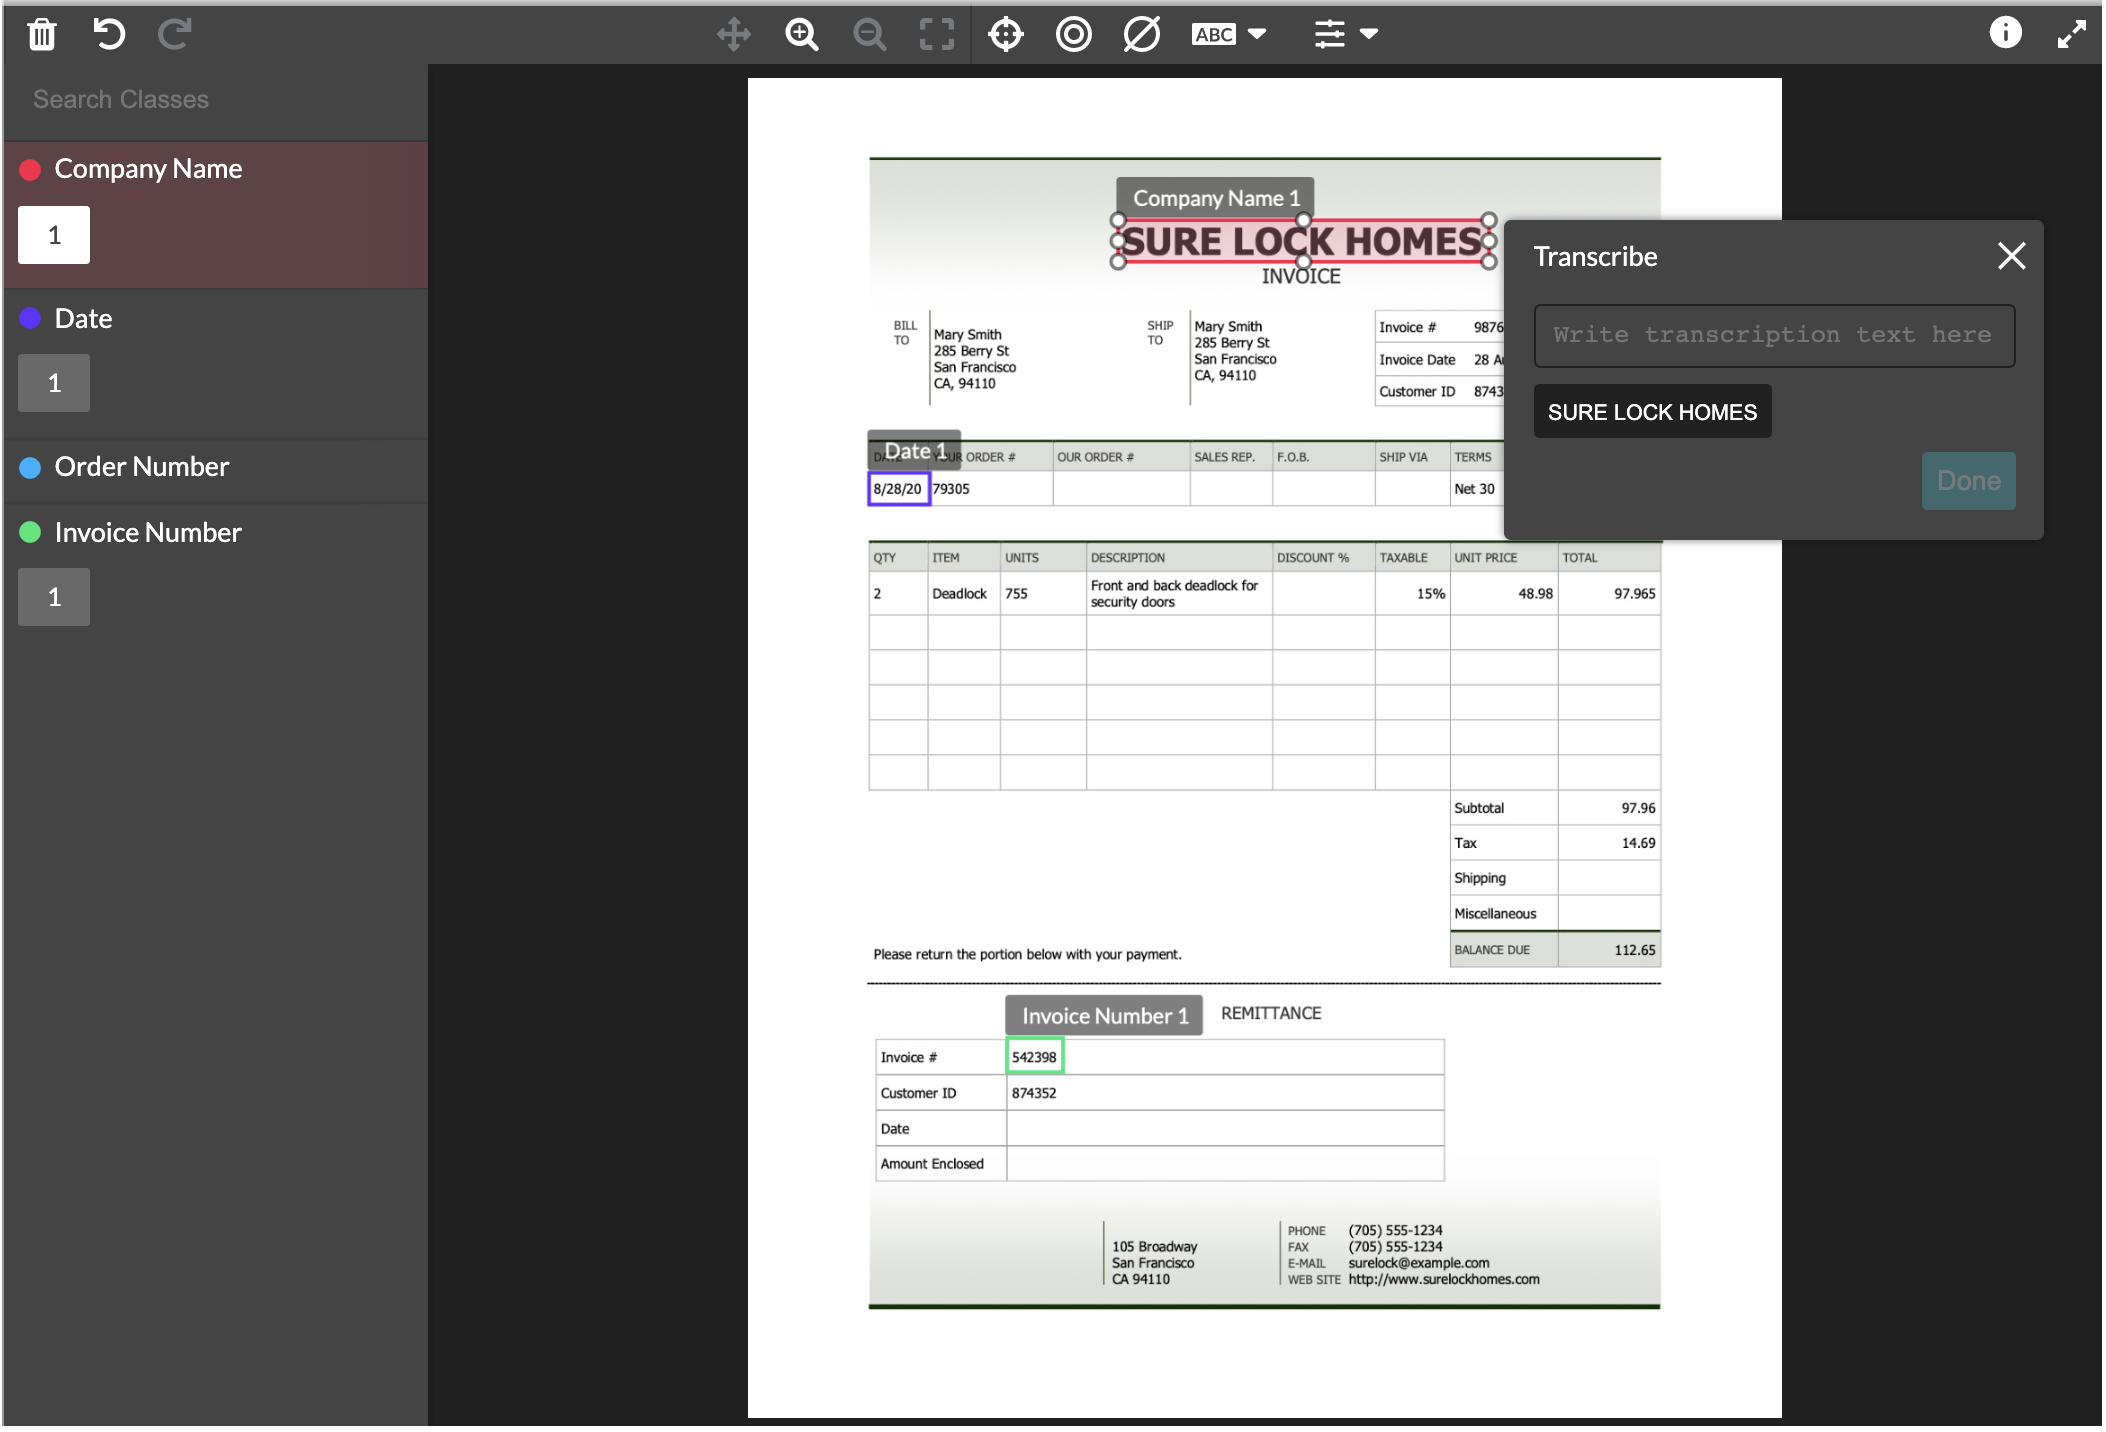 Annotating a scan of an invoice. Company name highlighted, ML platform accurately predicted the text highlighted.